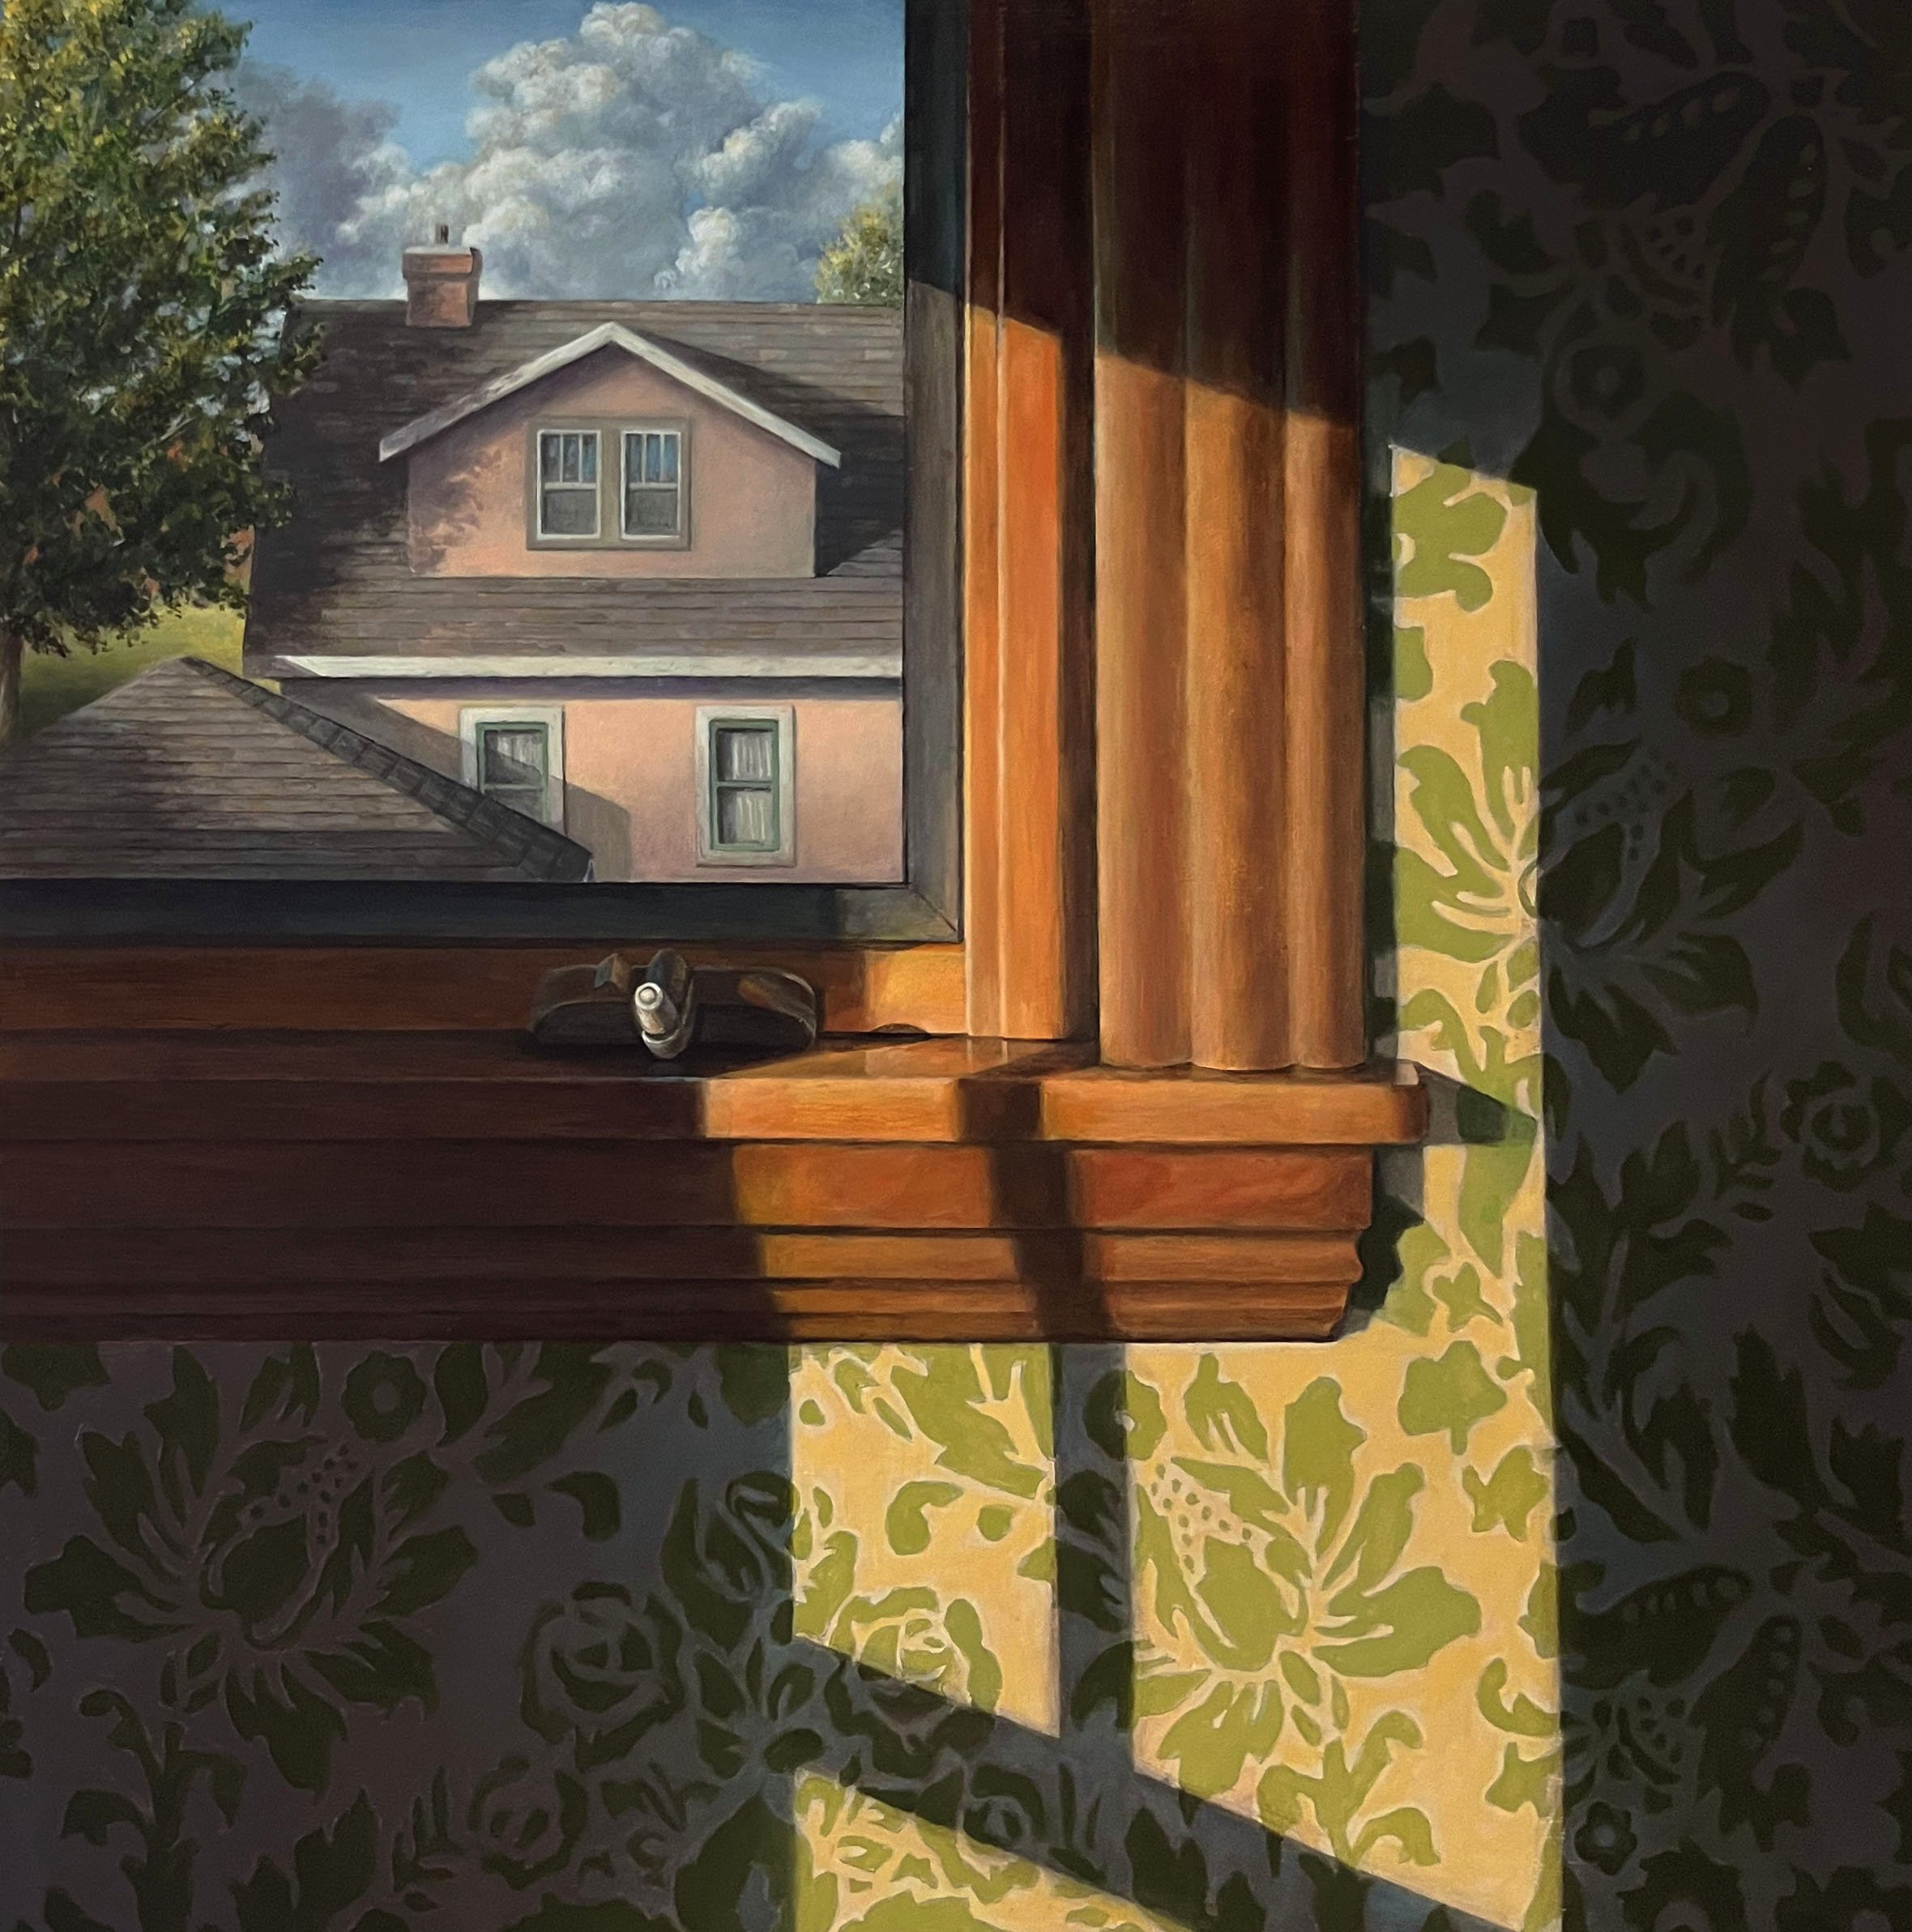   Wallpaper Shadow and House   2023  Oil on linen over panel  16 x 16 inches   